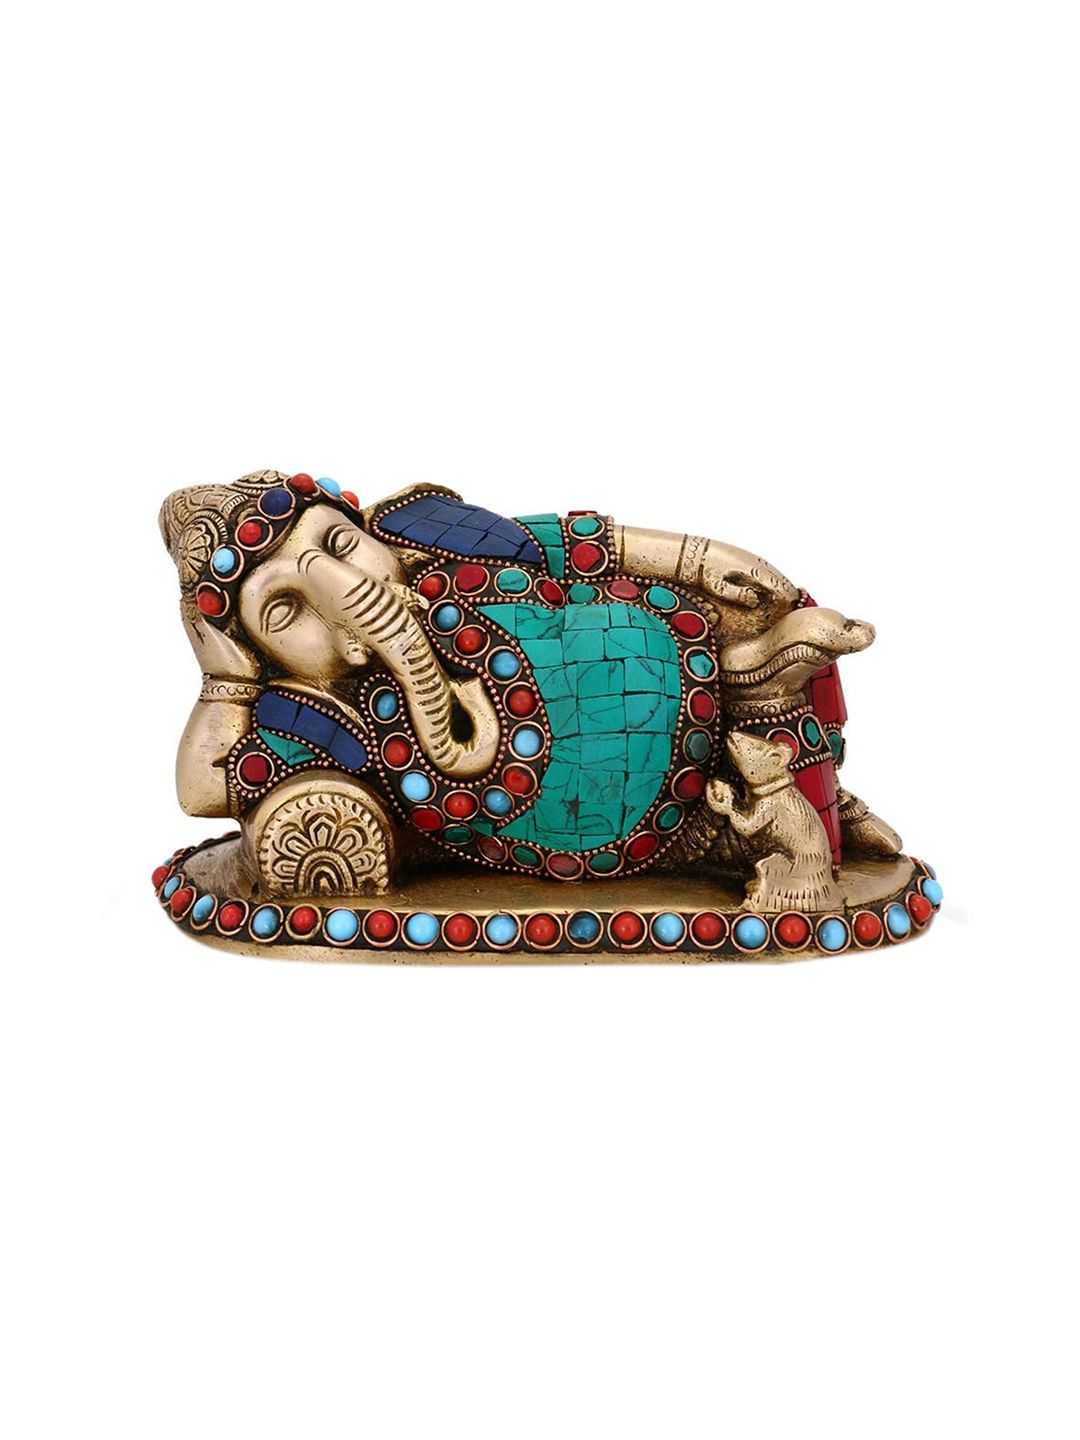 CraftVatika Gold-Toned & Turquoise Blue Handcrafted Resting Ganesha Brass Idol Price in India